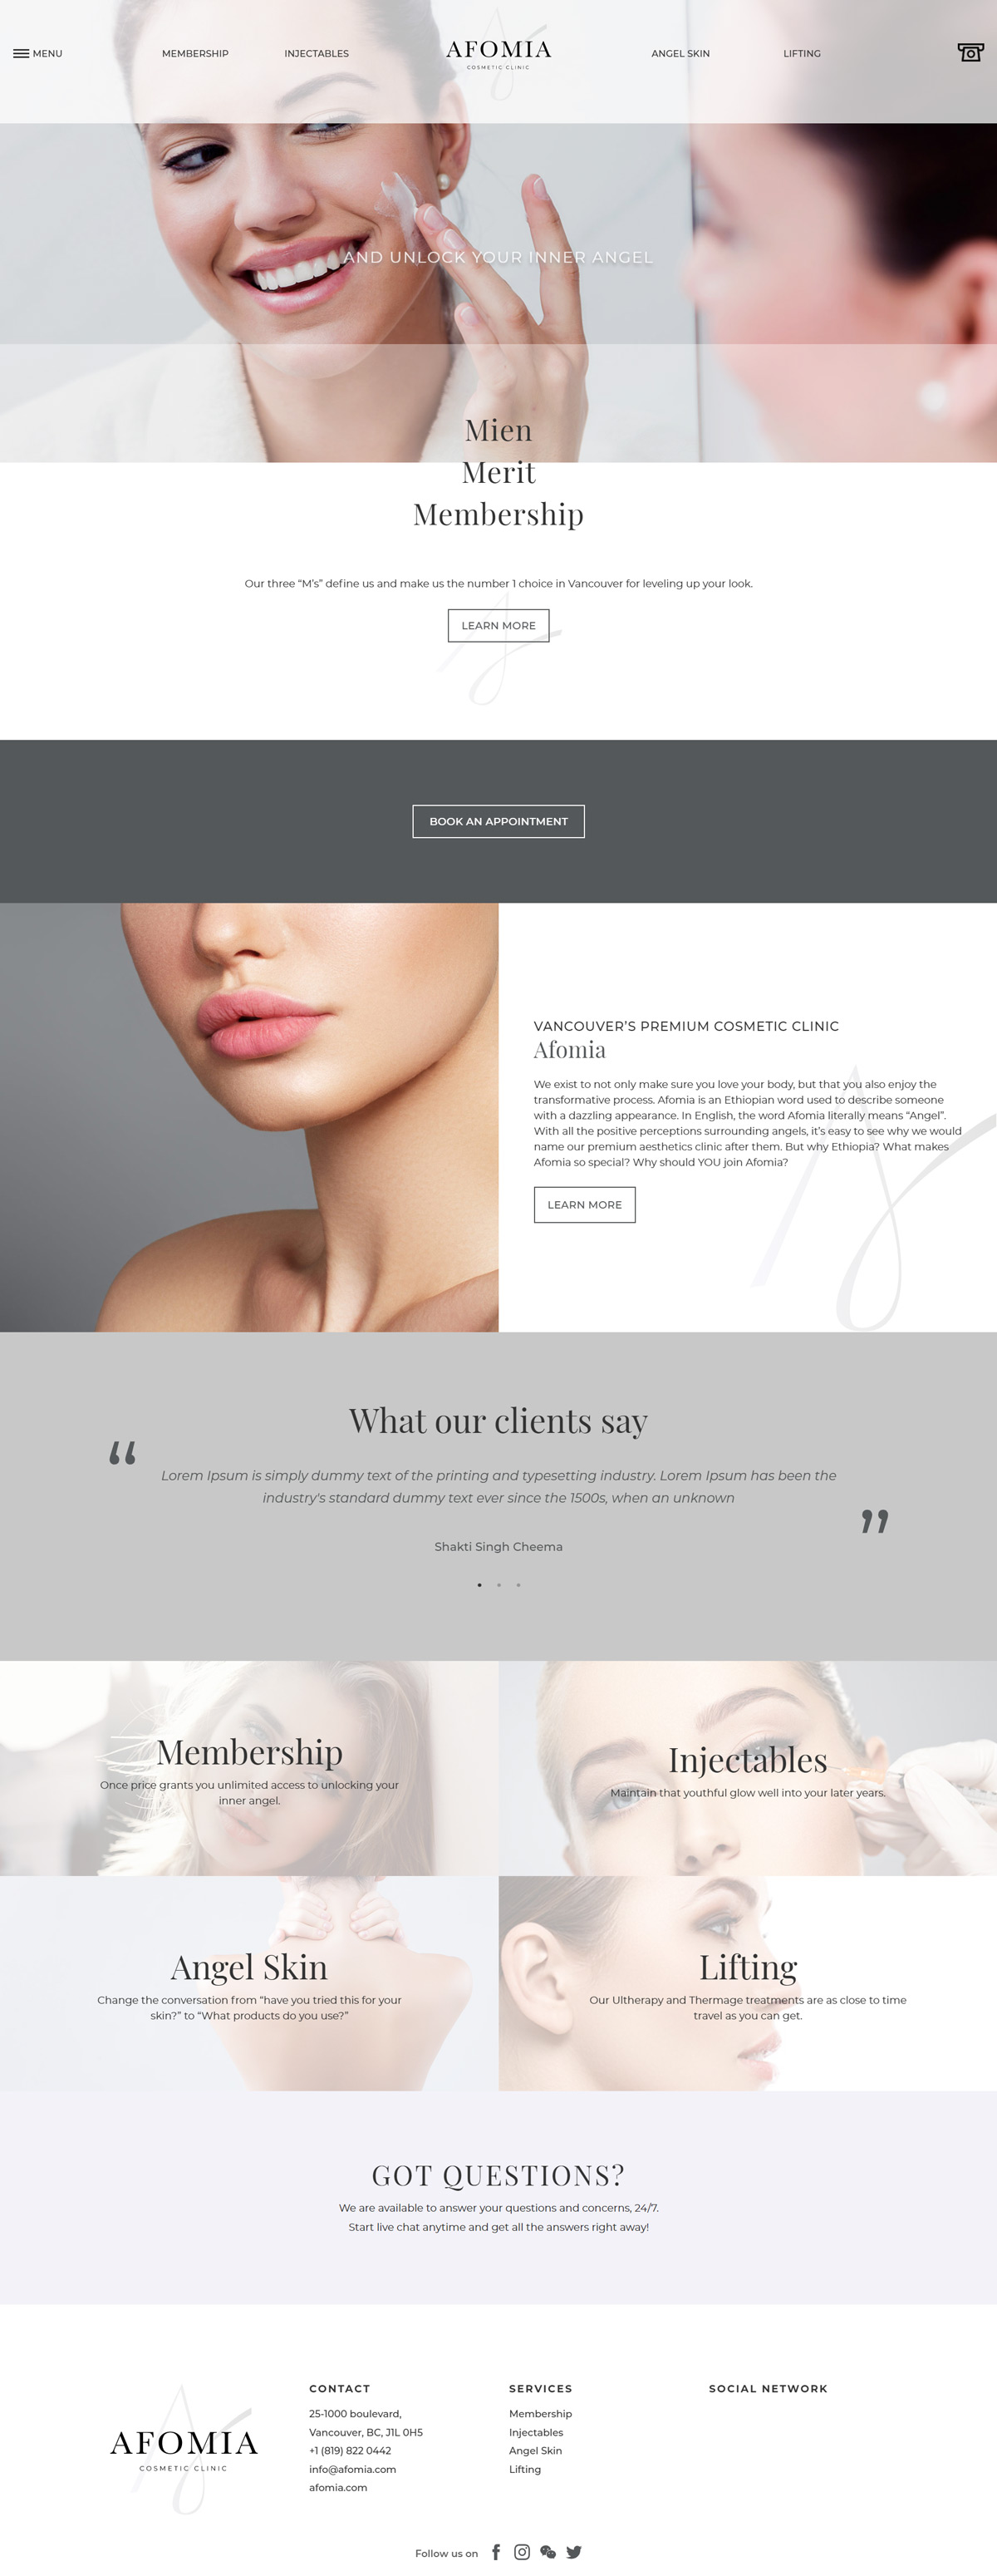 Afomia Cosmetic Clinic Website